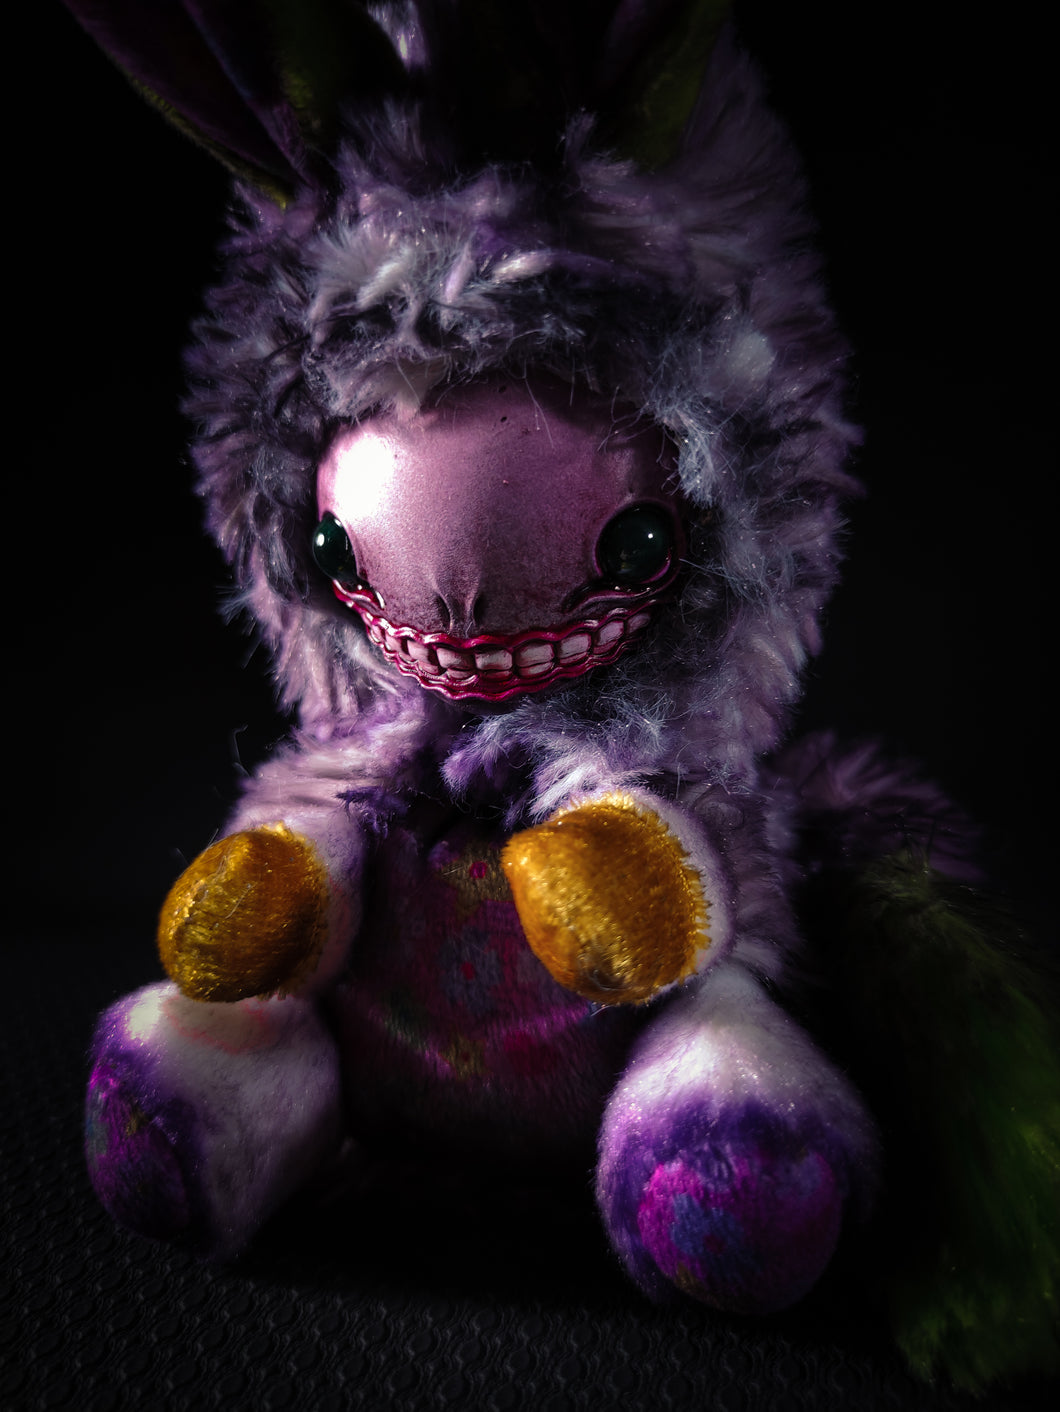 FRIEND Neon Infection Flavour - Cryptid Art Doll Plush Toy